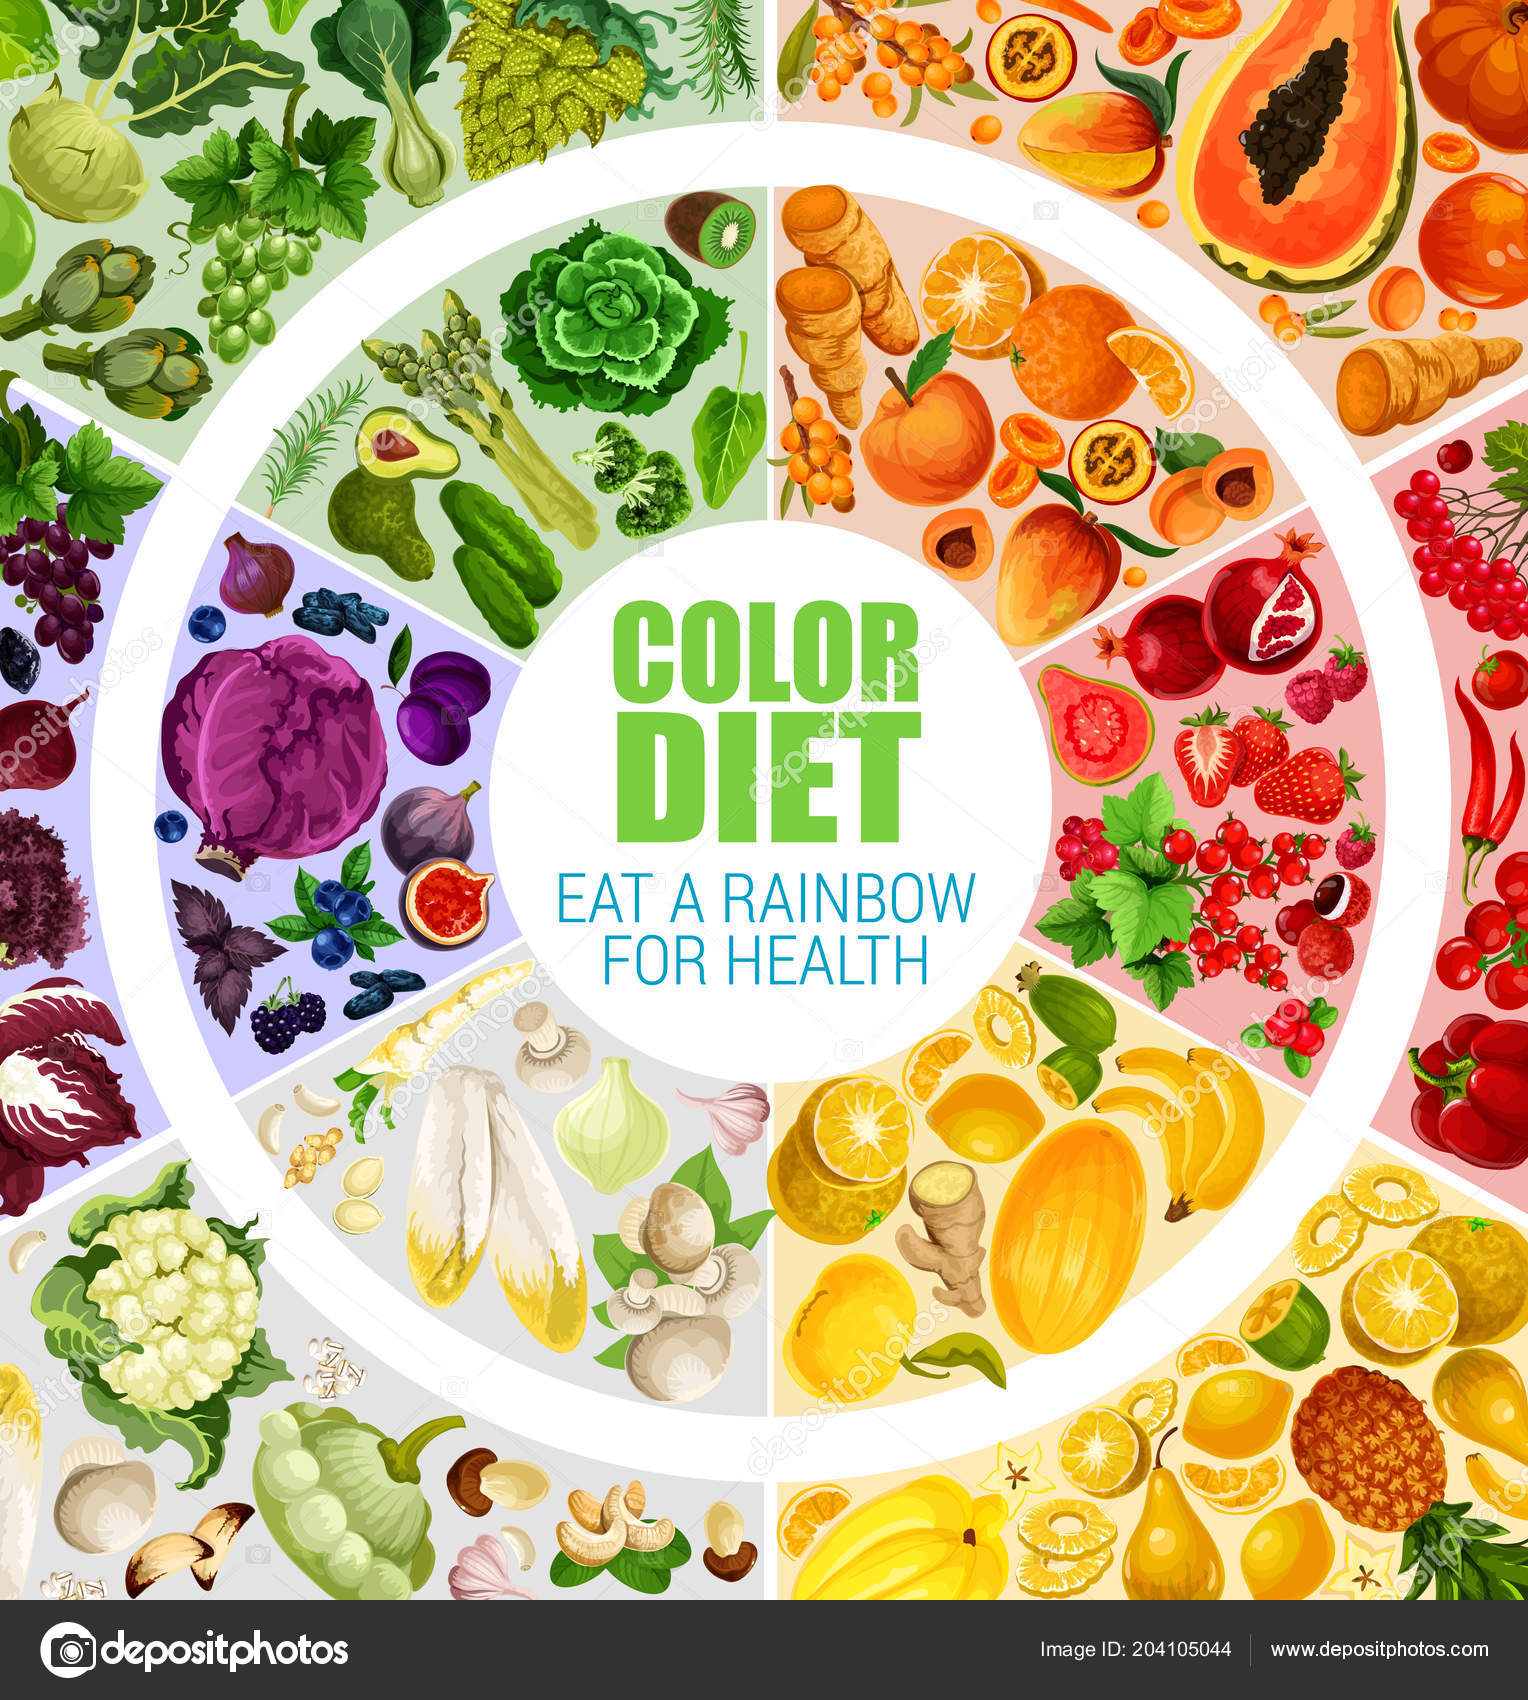 NEW Health Poster Fruits and Veggies 